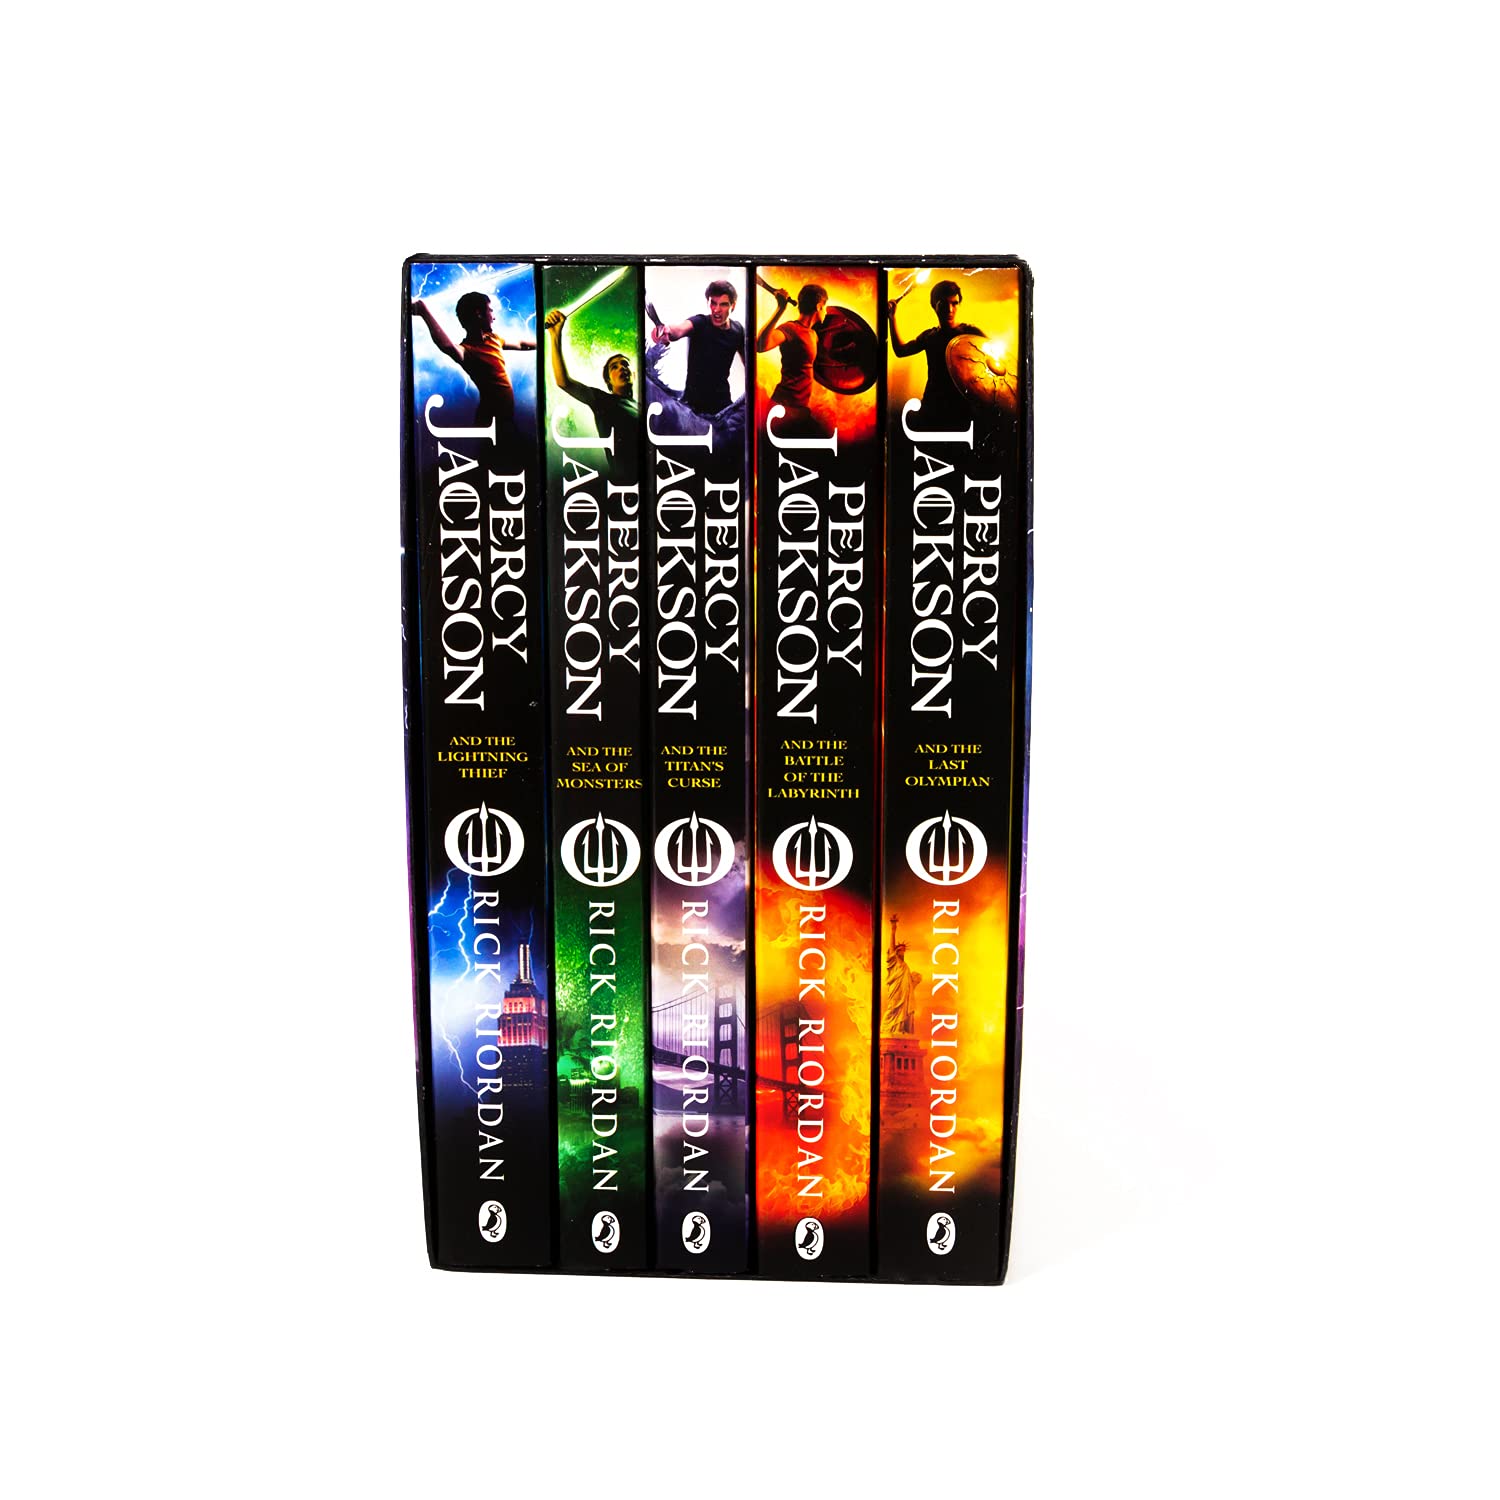 PERCY JACKSON ULTIMATE COLLECTION - Box Set